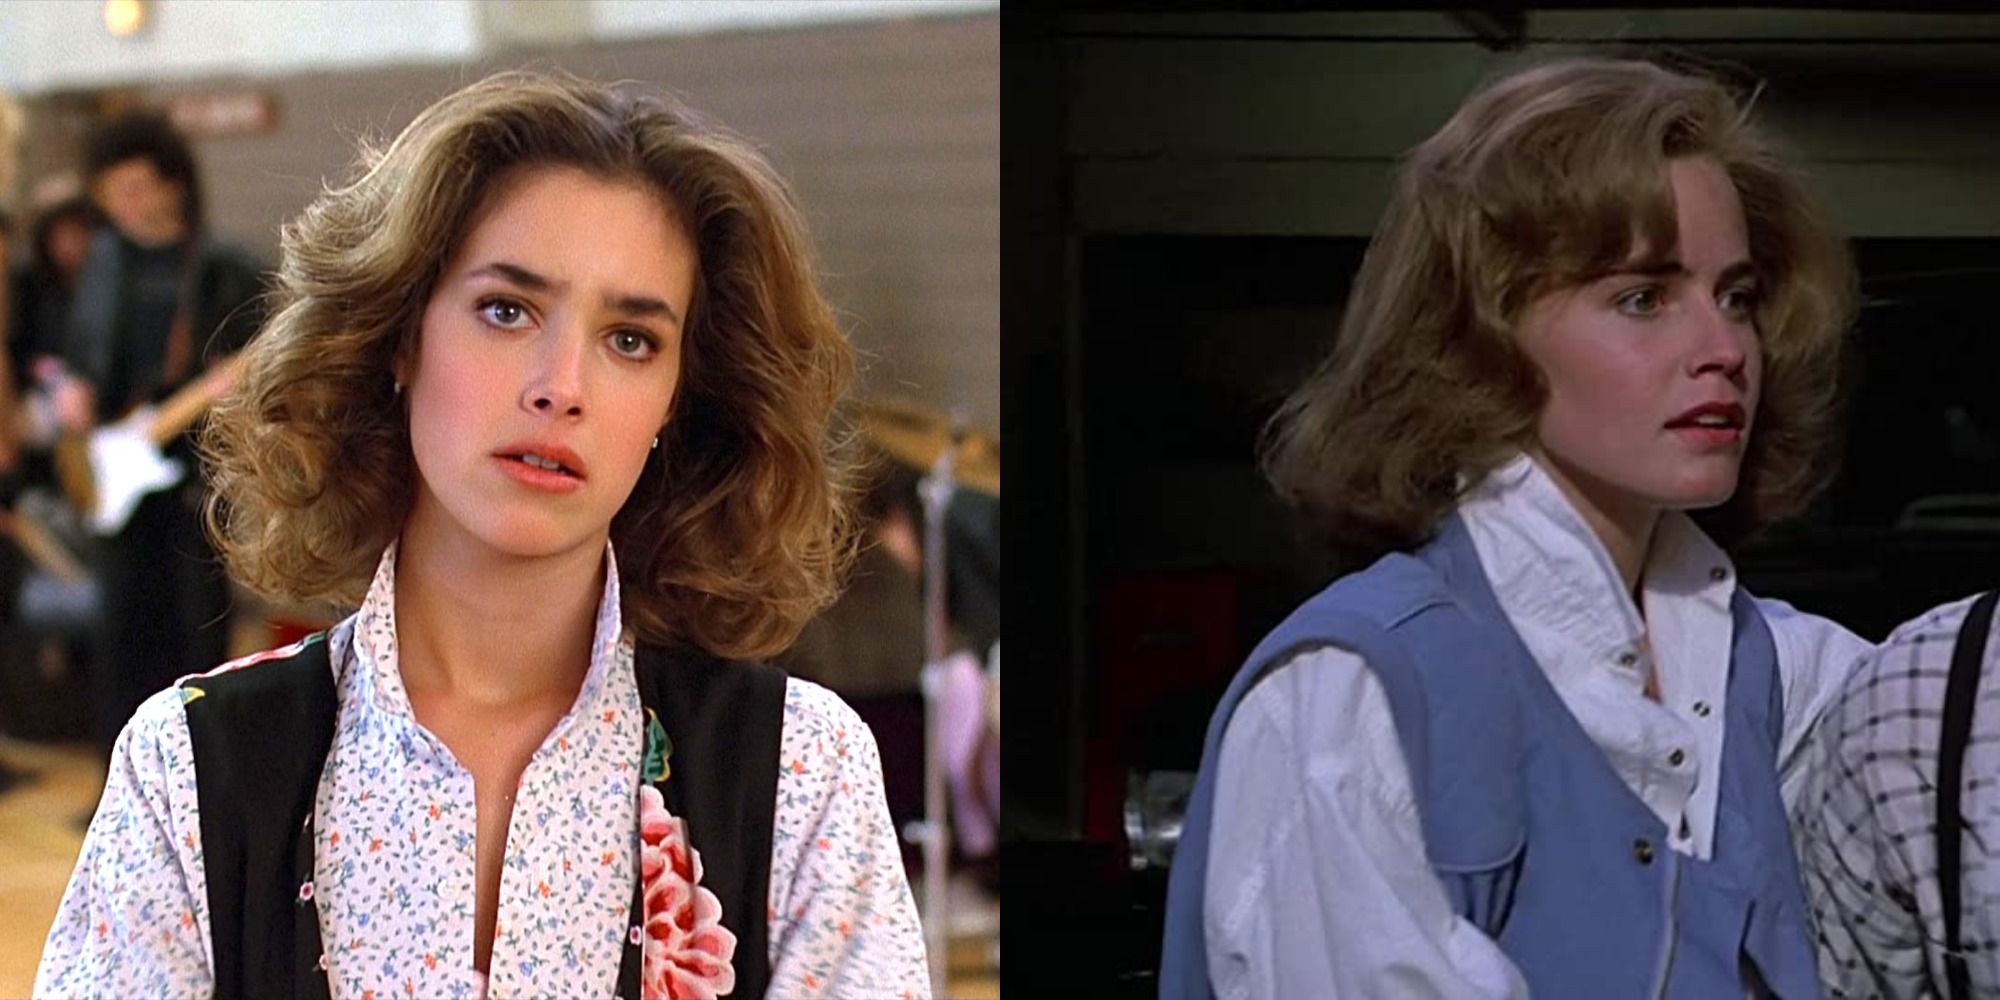 side by side images of Claudia Wells and Elisabeth Shue in the Back To The Future films